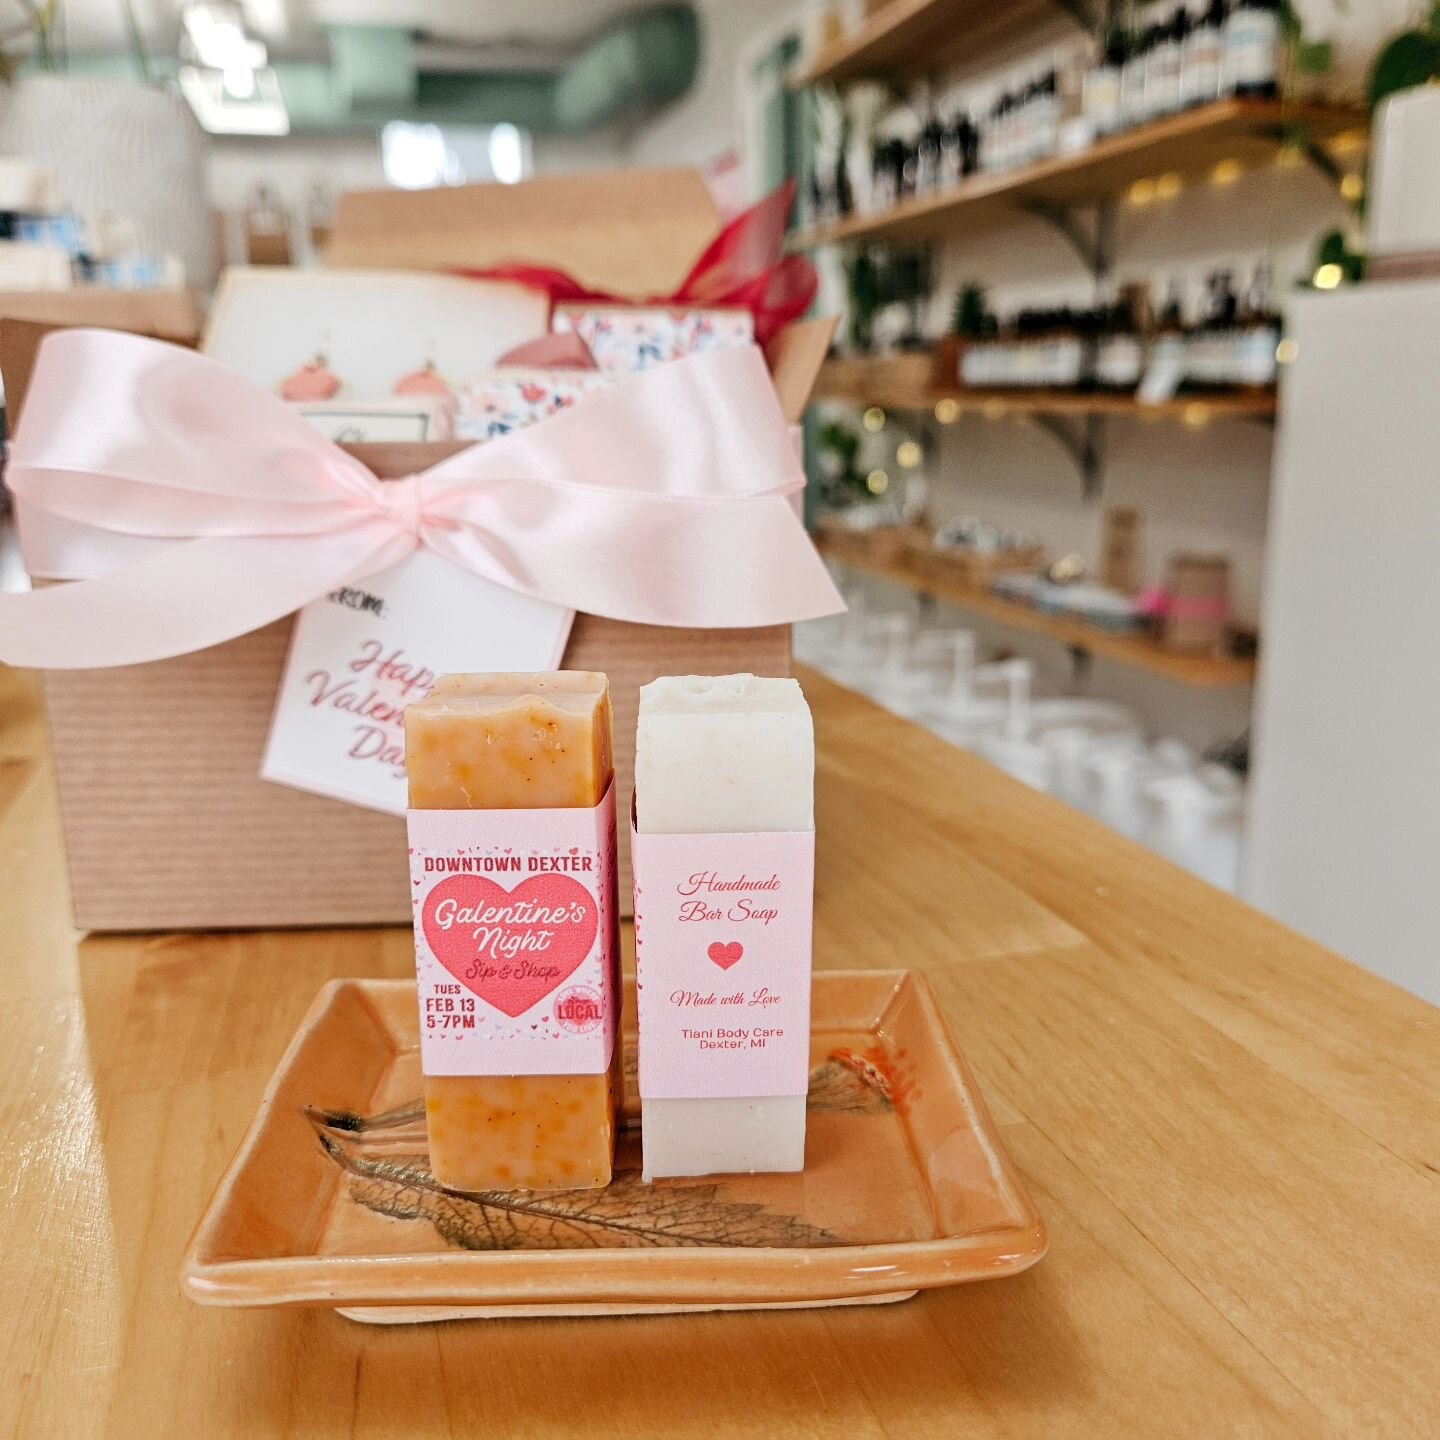 It's Galentine's Night!! ✨️🌸 We will have drinks, mini soaps for all visitors, and 15% off all pink, purple &amp; red colored products at our shop.

DRINKS: Sparkling wine from @erratic.ale.co and Valentine's Day themed sparkling juice. 

MINI SOAPS